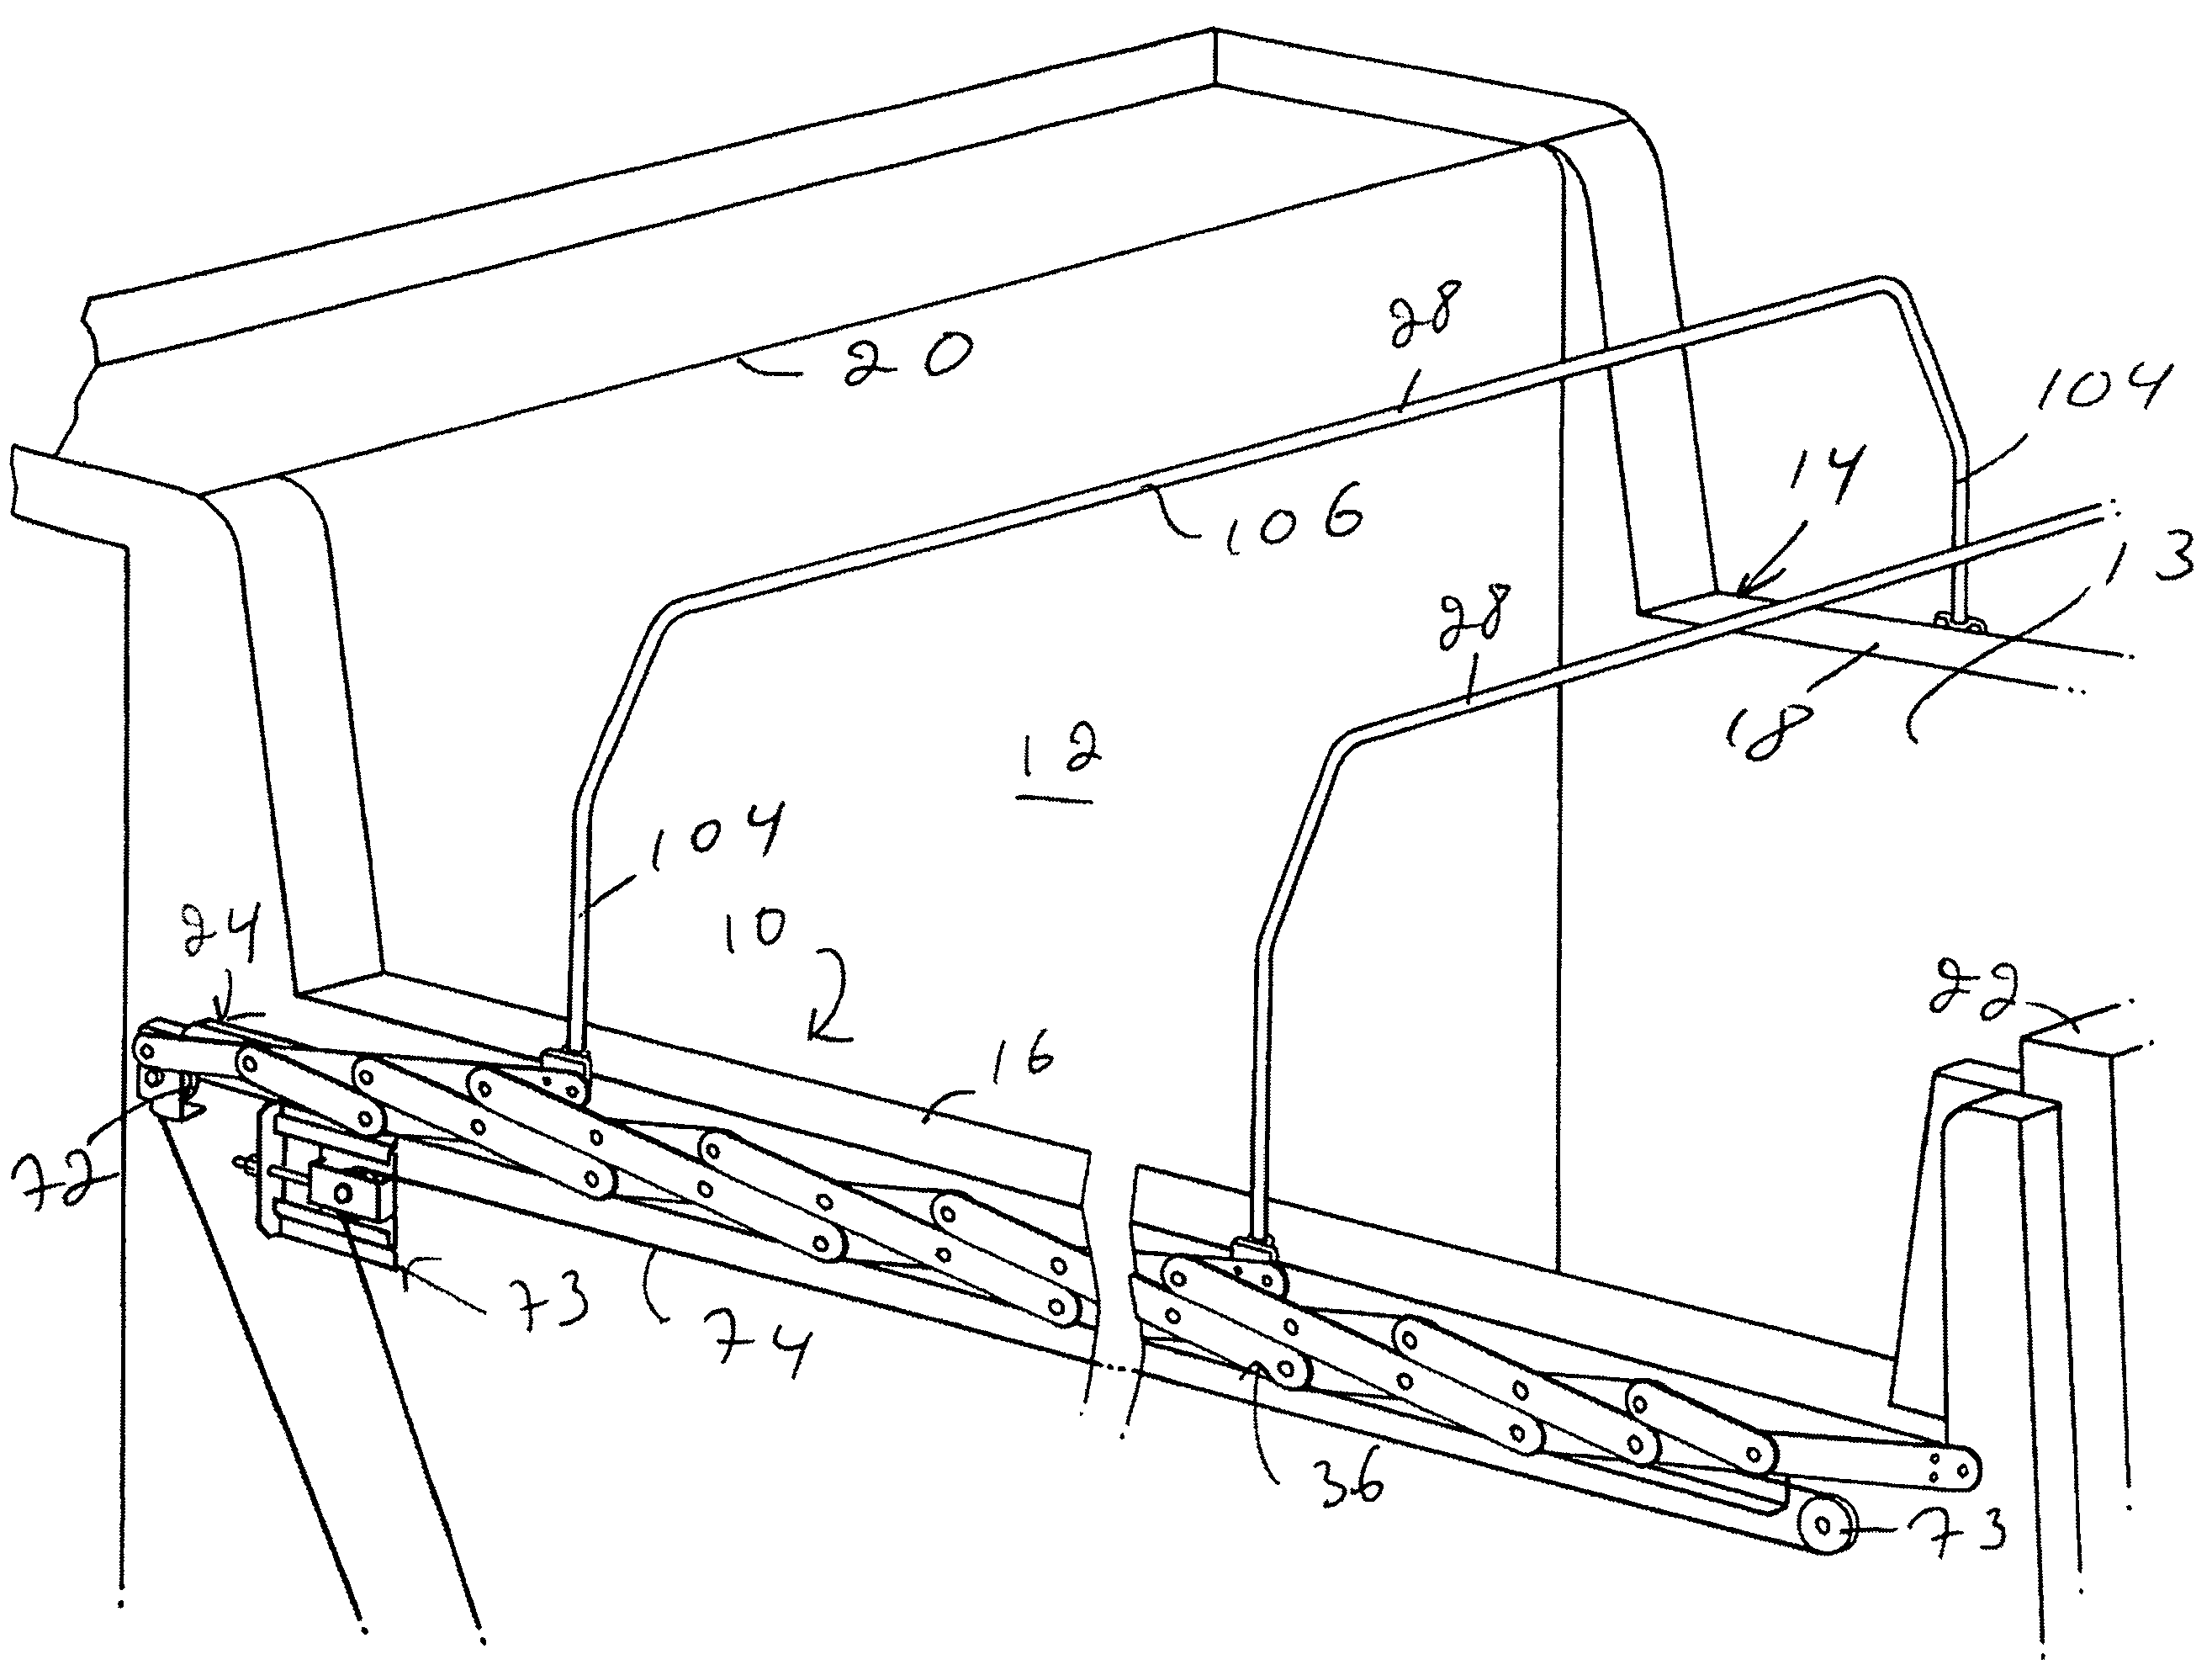 Device for manipulating a tarpaulin